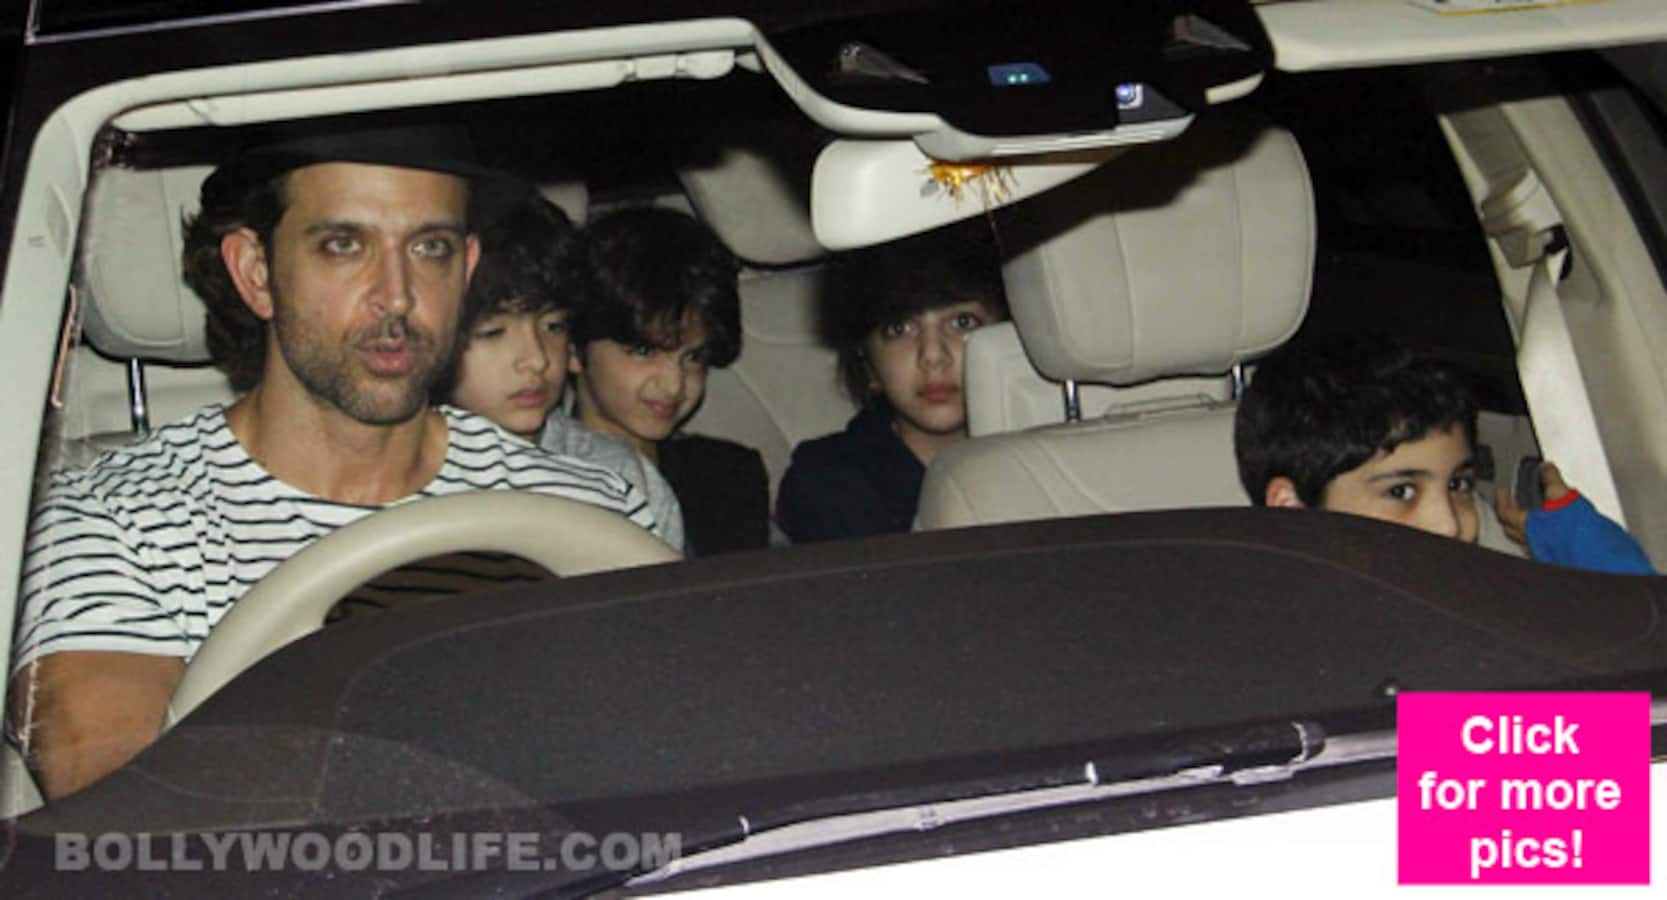 Hrithik Roshan takes his kids Hrehaan and Hridhaan out for a movie - view pics!